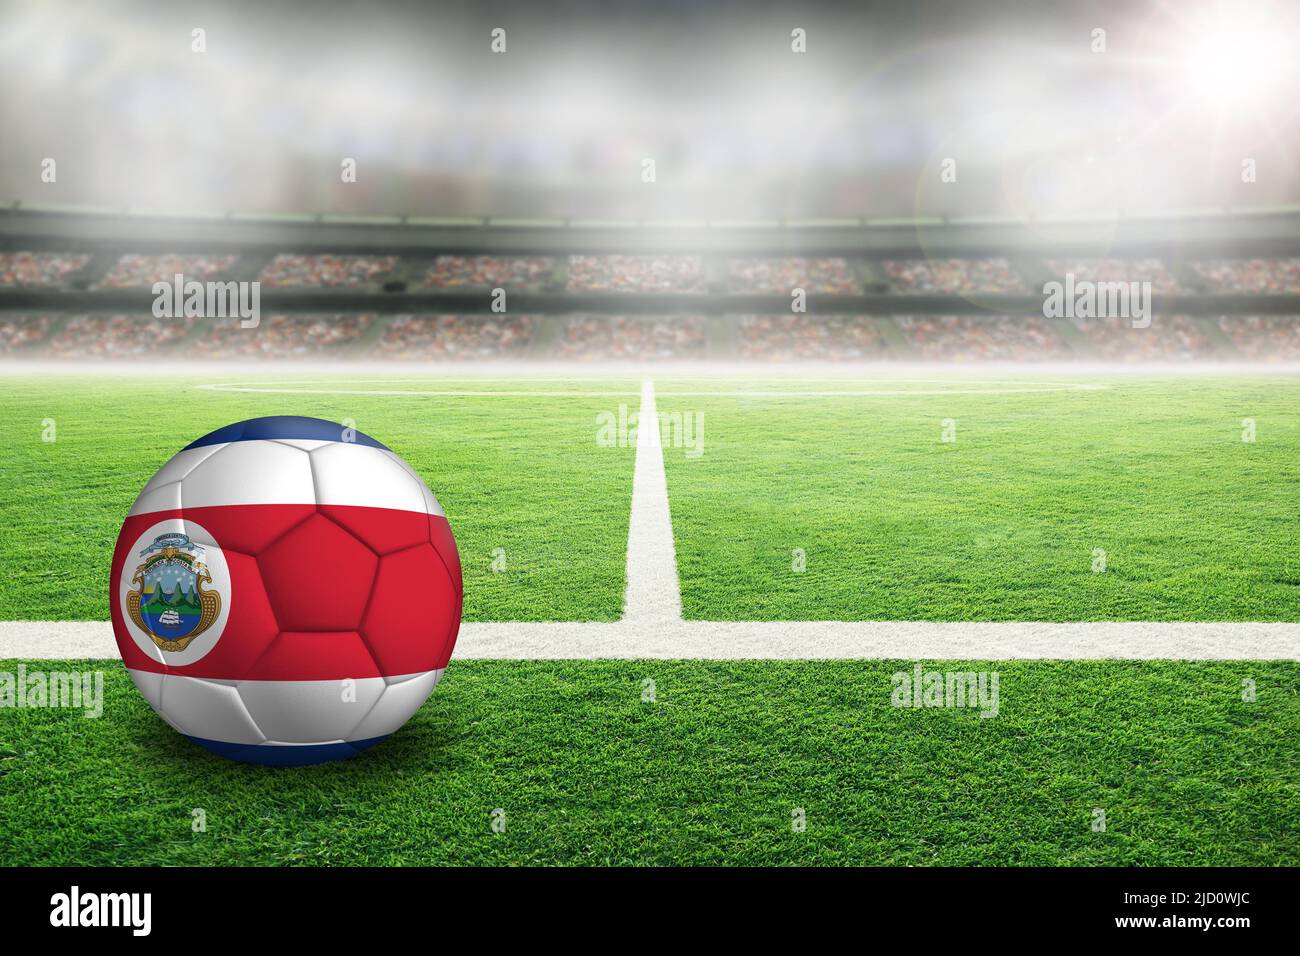 Costa Rica football in brightly lit outdoor stadium with painted Costa Rican flag. Focus on foreground and soccer ball with shallow depth of field on Stock Photo